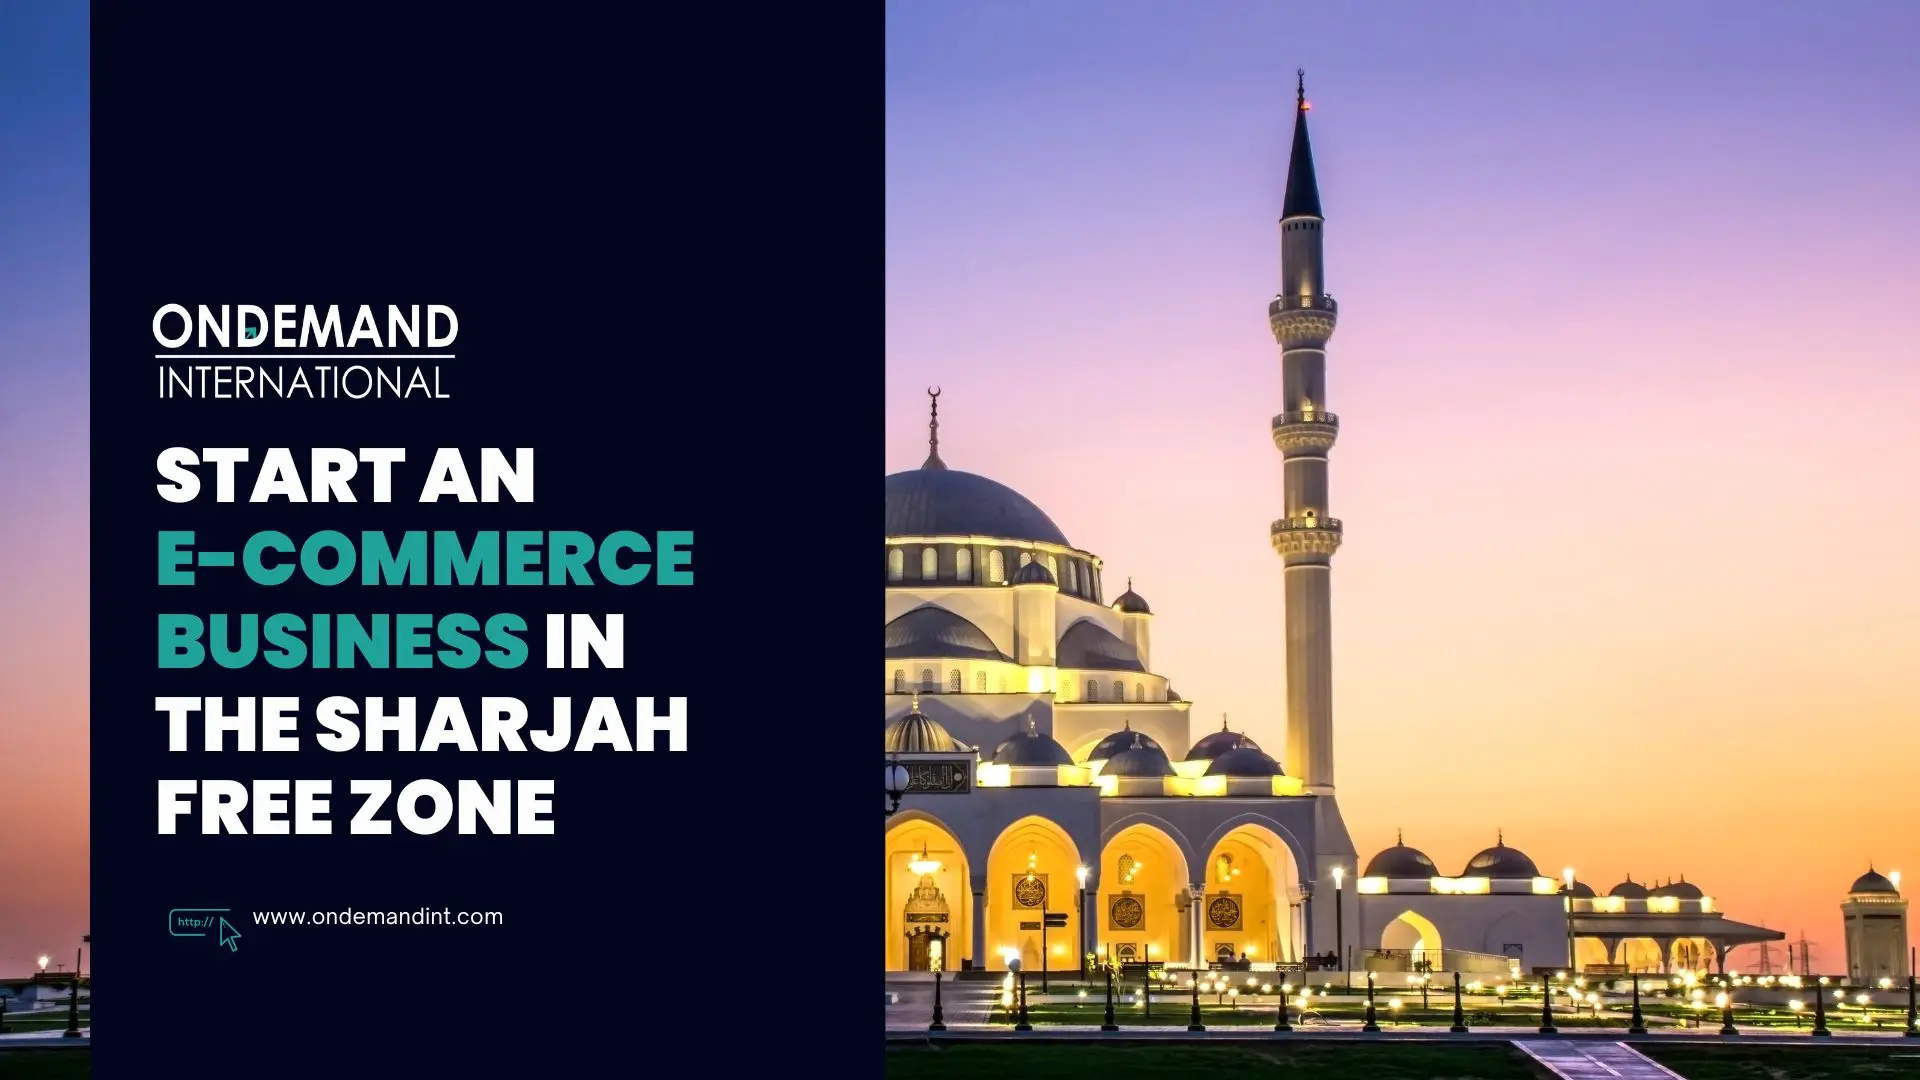 Start an E-commerce Business in the Sharjah Free Zone